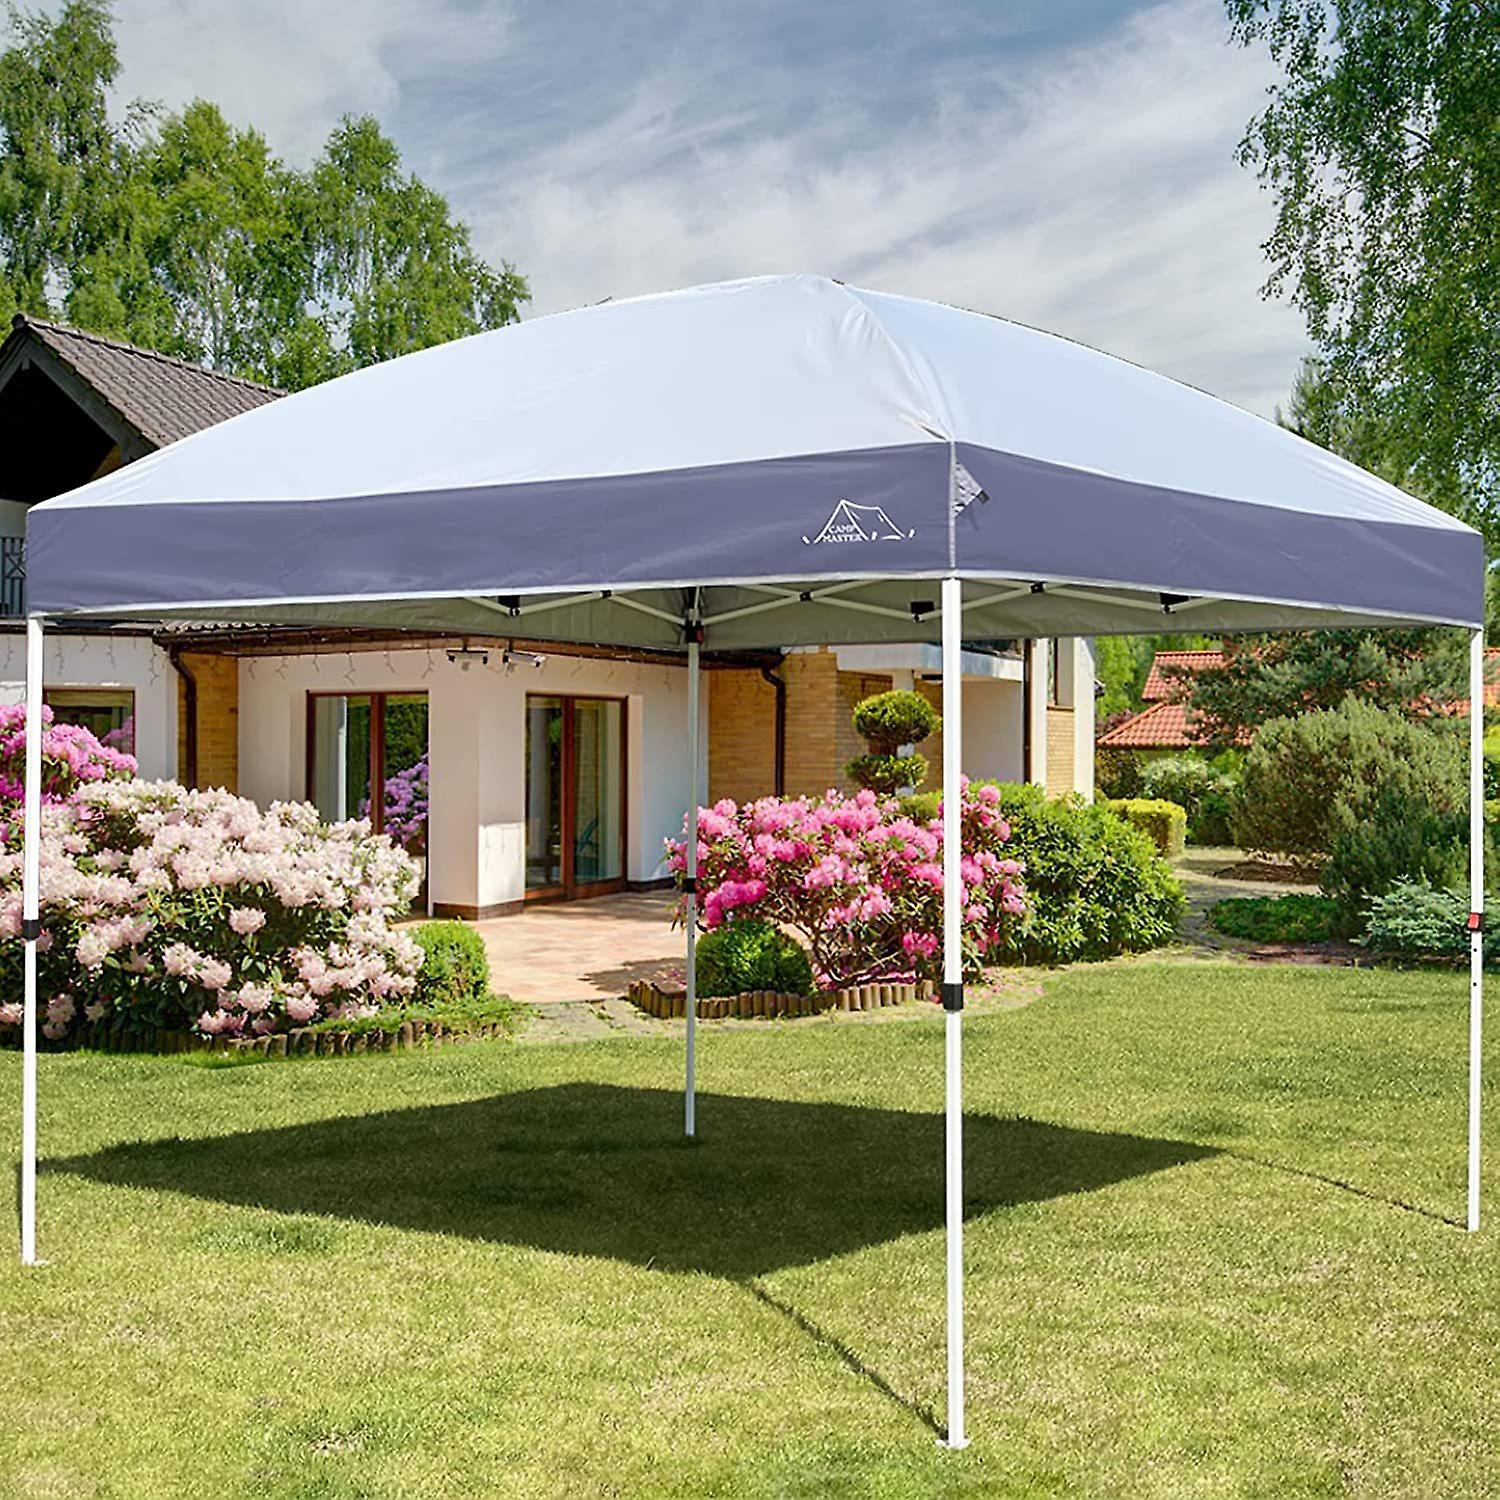 Canopy Tent， Outdoor 10x10 Pop Up Dome Canopy，patio Tents For Parties，quick Easy Up Canopies With Waterproof Roof Roller Bag 4 Sandbags (10x10 Ft， Gra